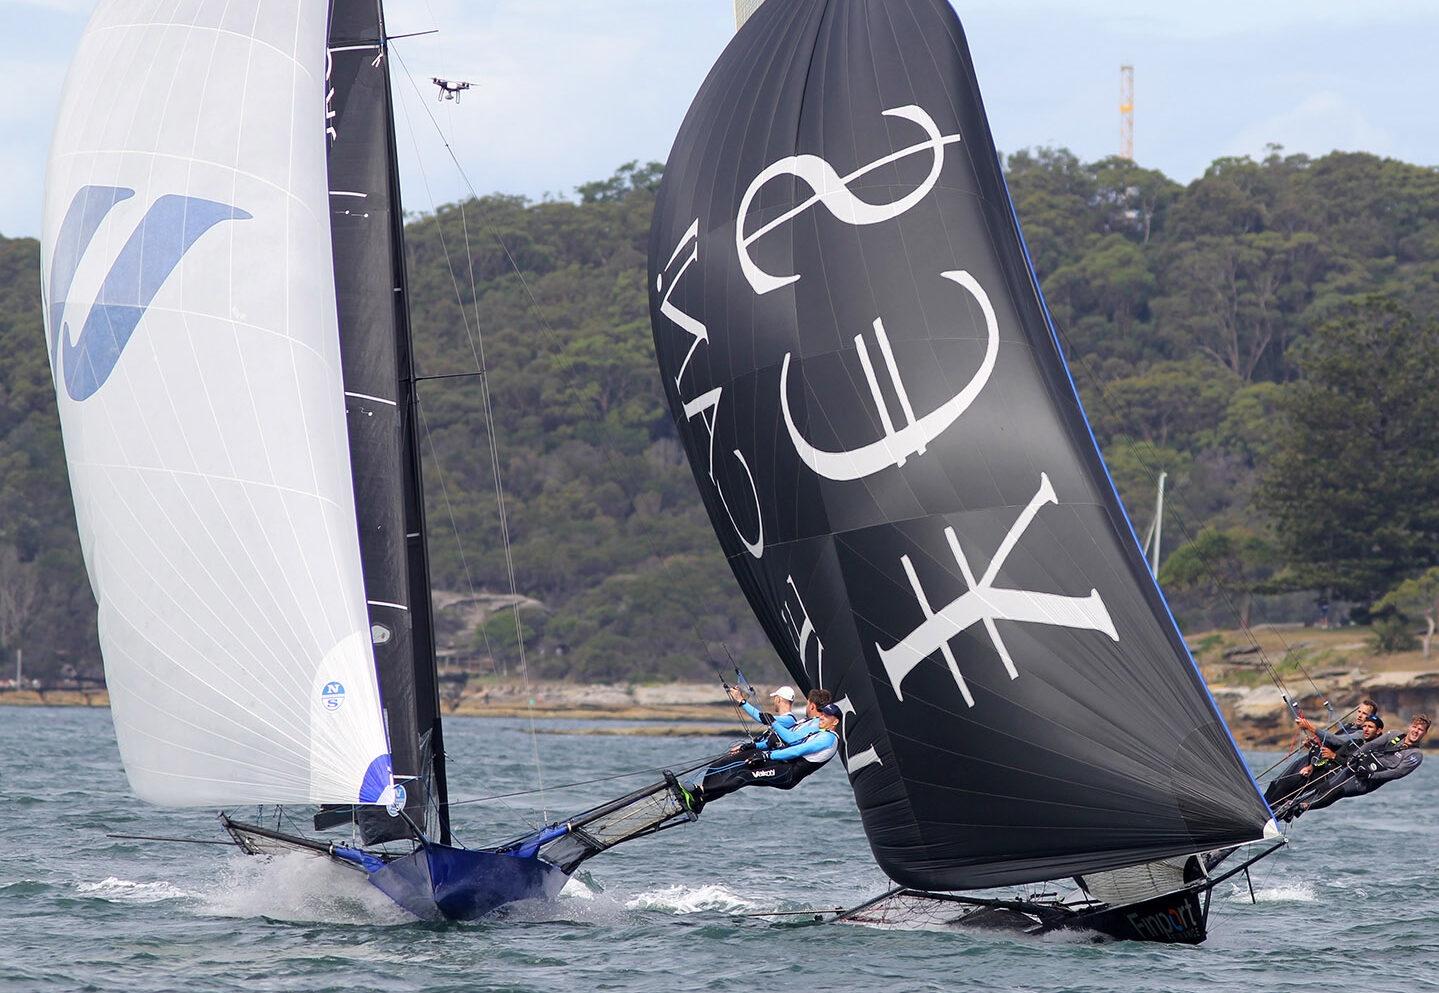  18 Footer  NSW Championship 2020  Race 4 with a tight finish